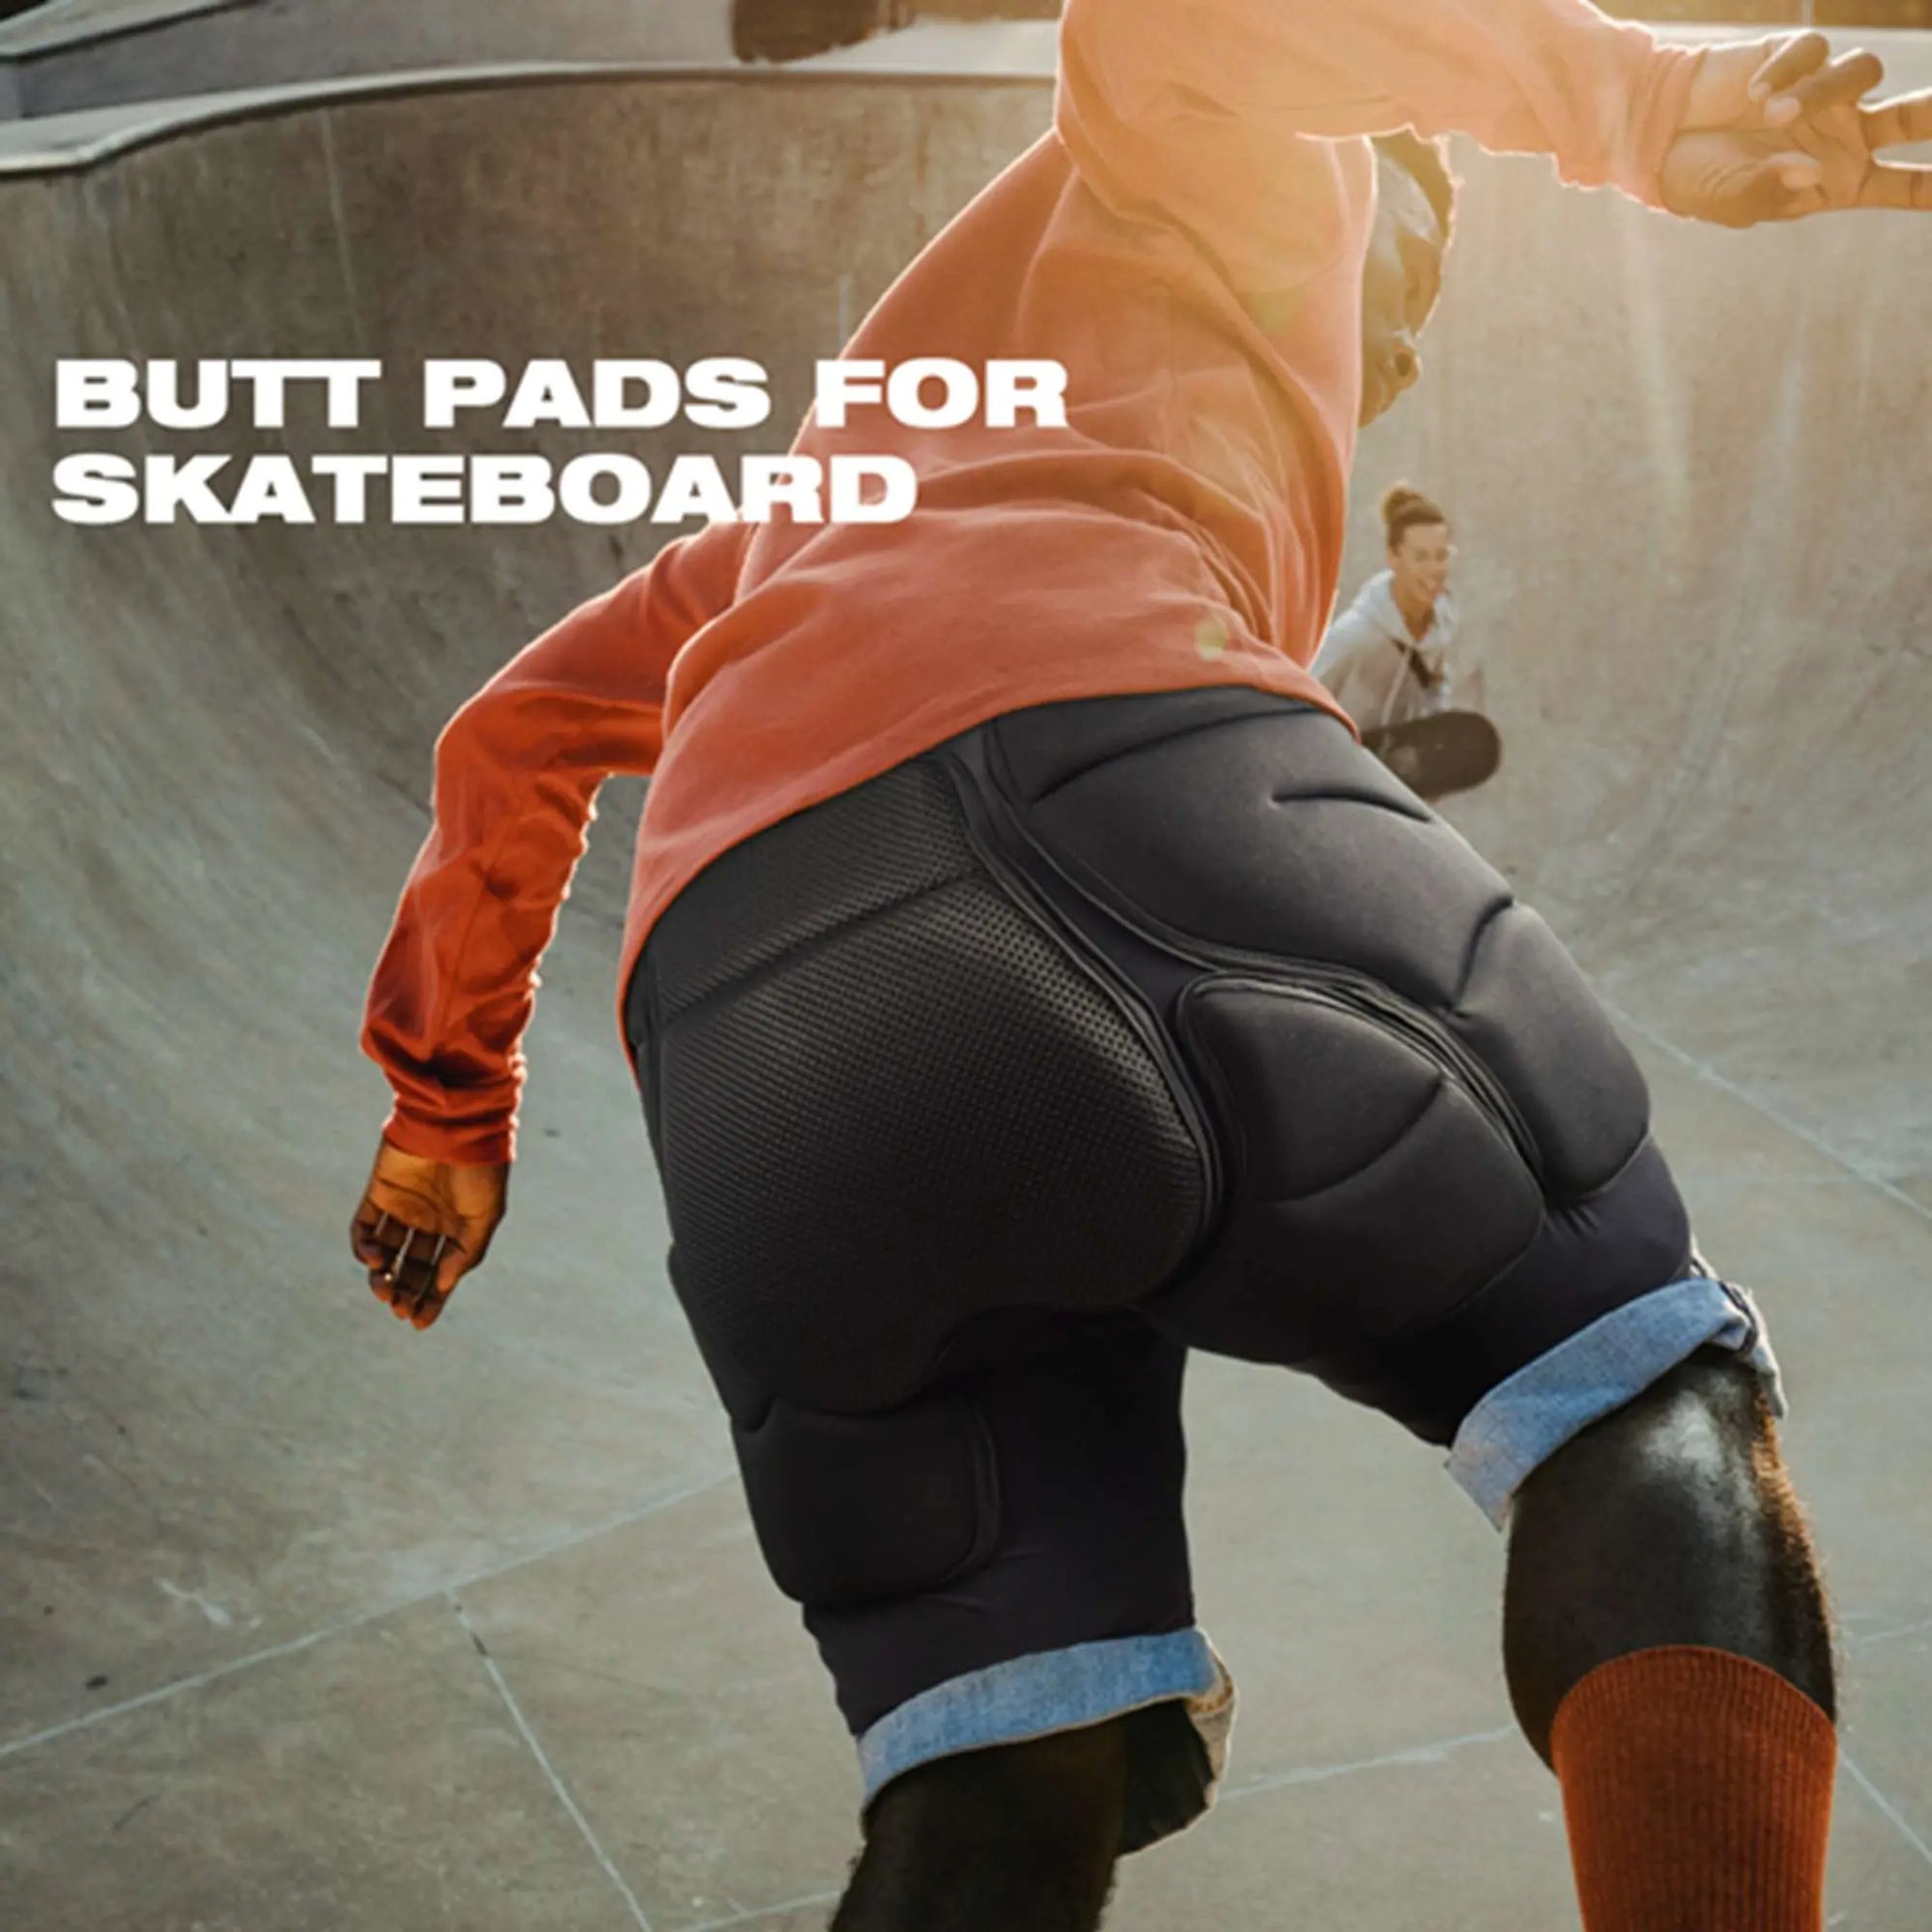 Soared 3D Protection Hip Butt XPE Padded Shorts for ski, ice